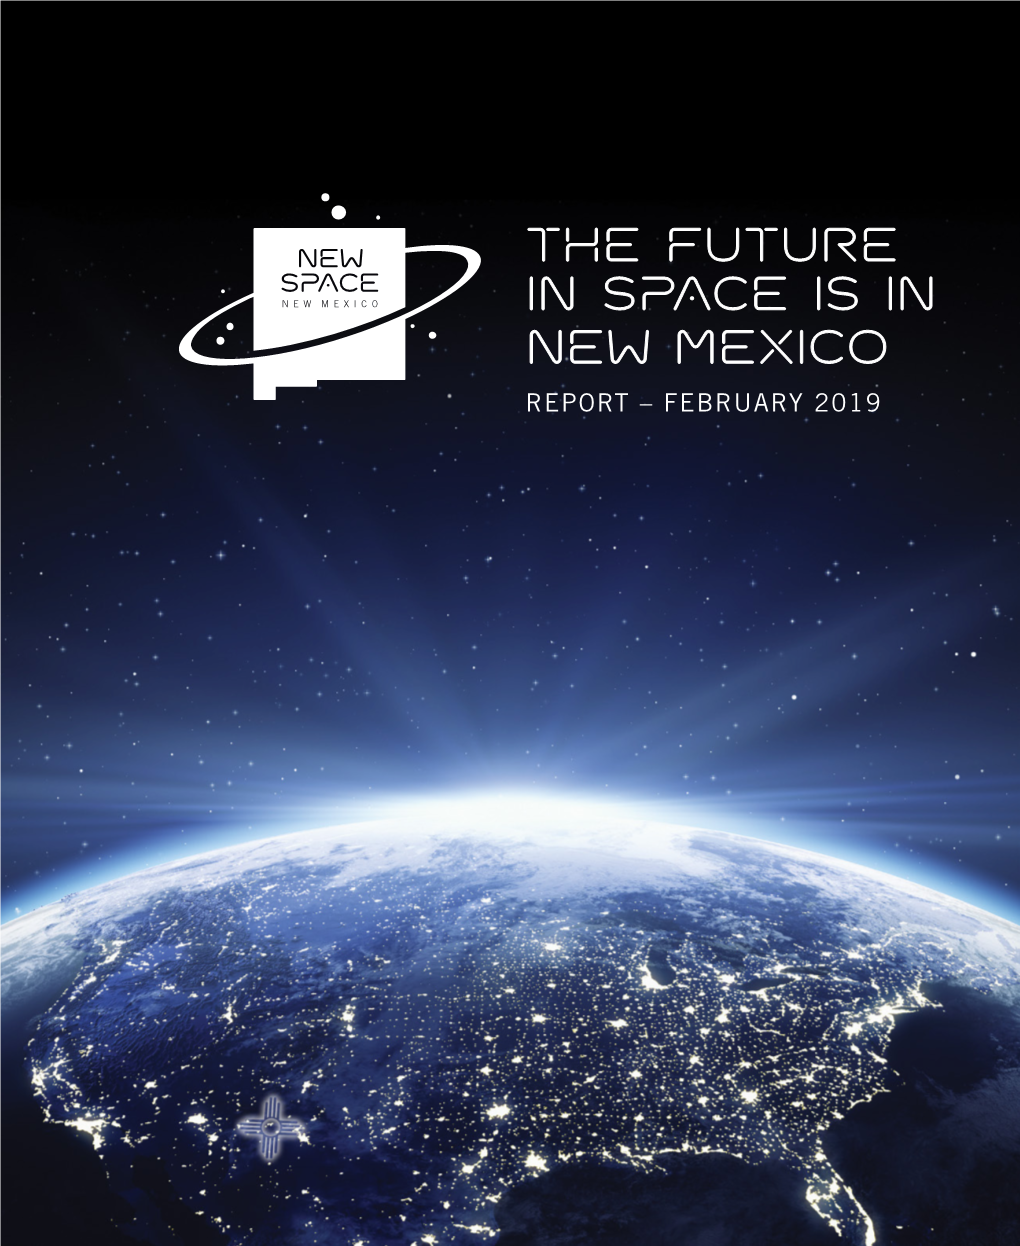 "The Future in Space Is in New Mexico" Report